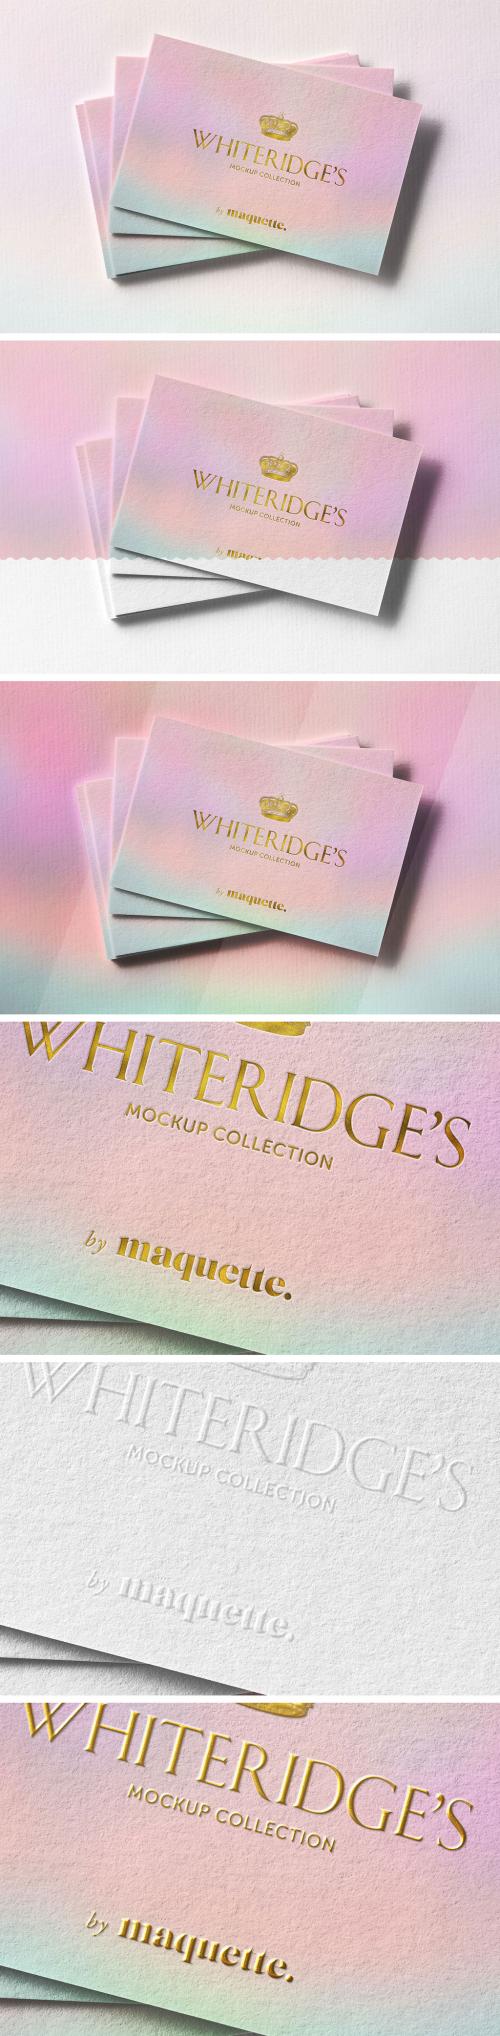 Stack of Luxury Business Cards with Gold Embossing Mockup 2 - 130414397